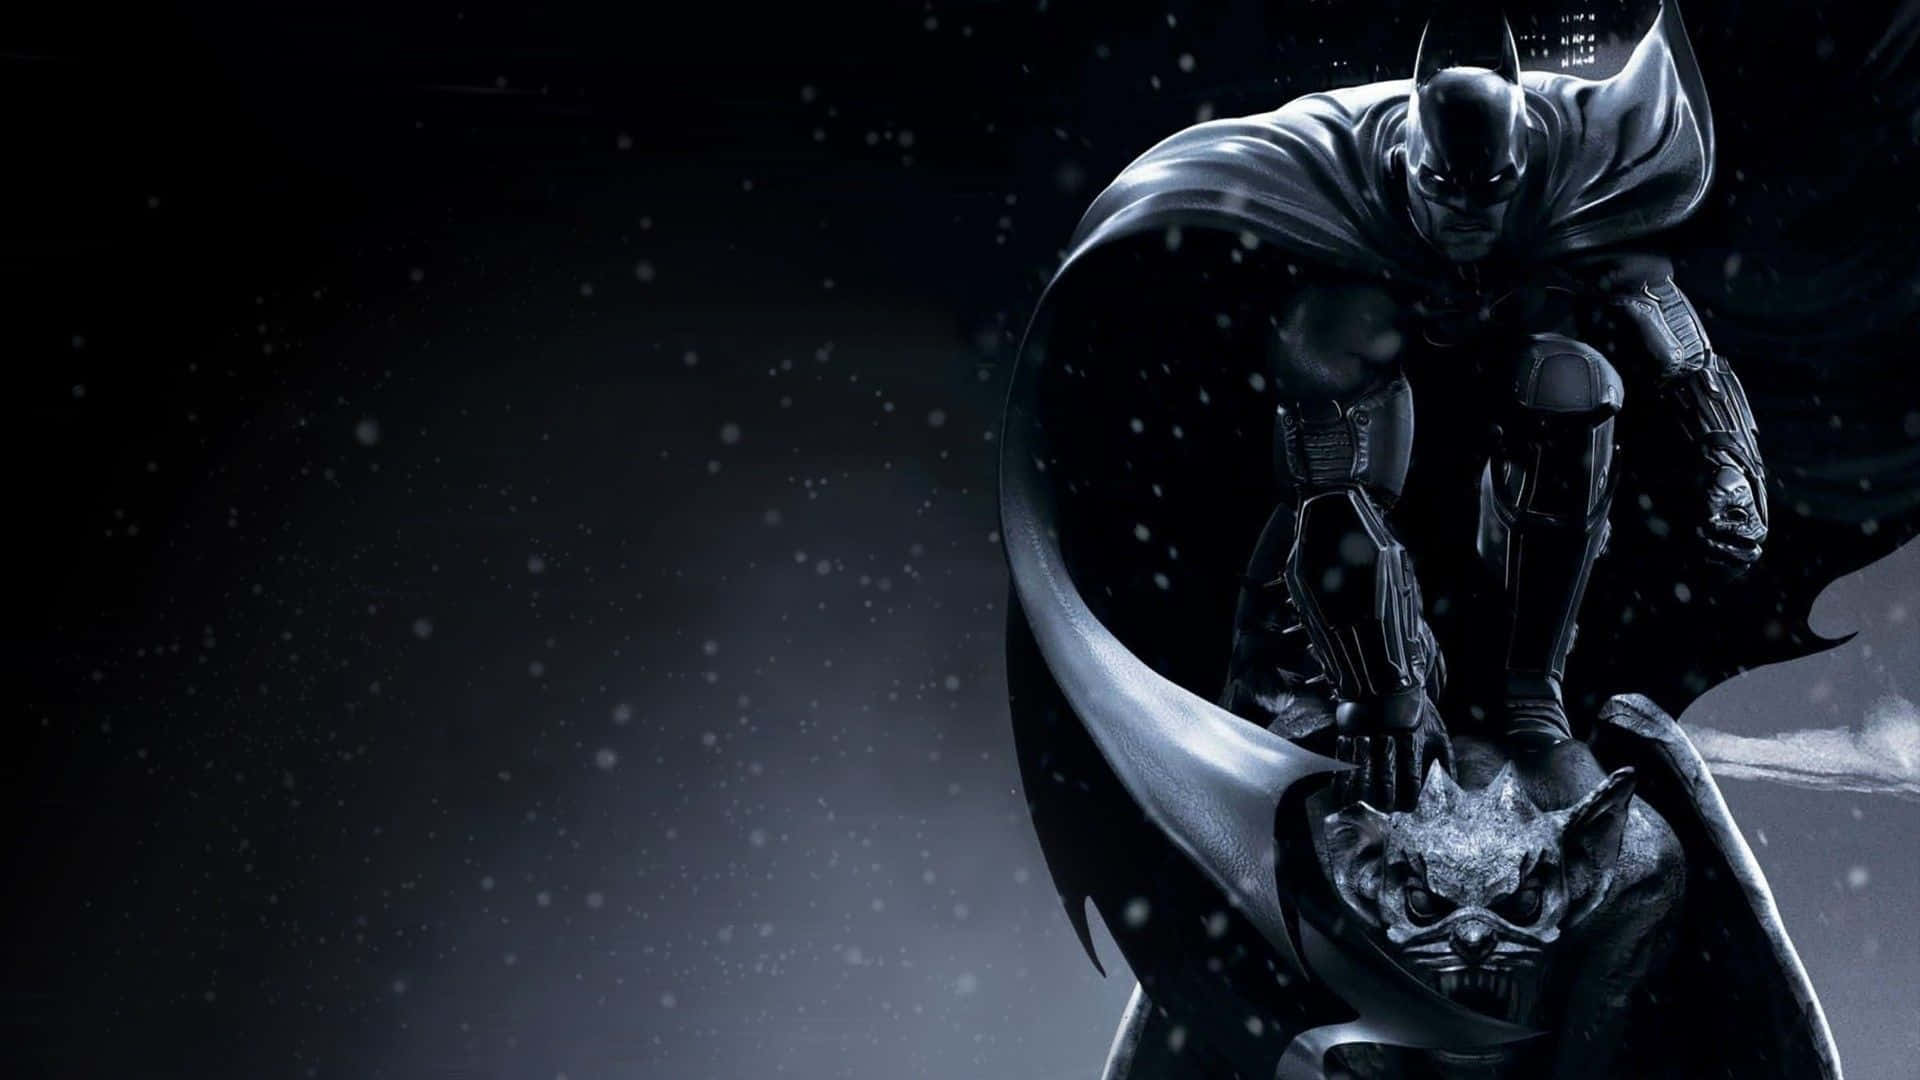 Get to work in style with this Batman Laptop Wallpaper